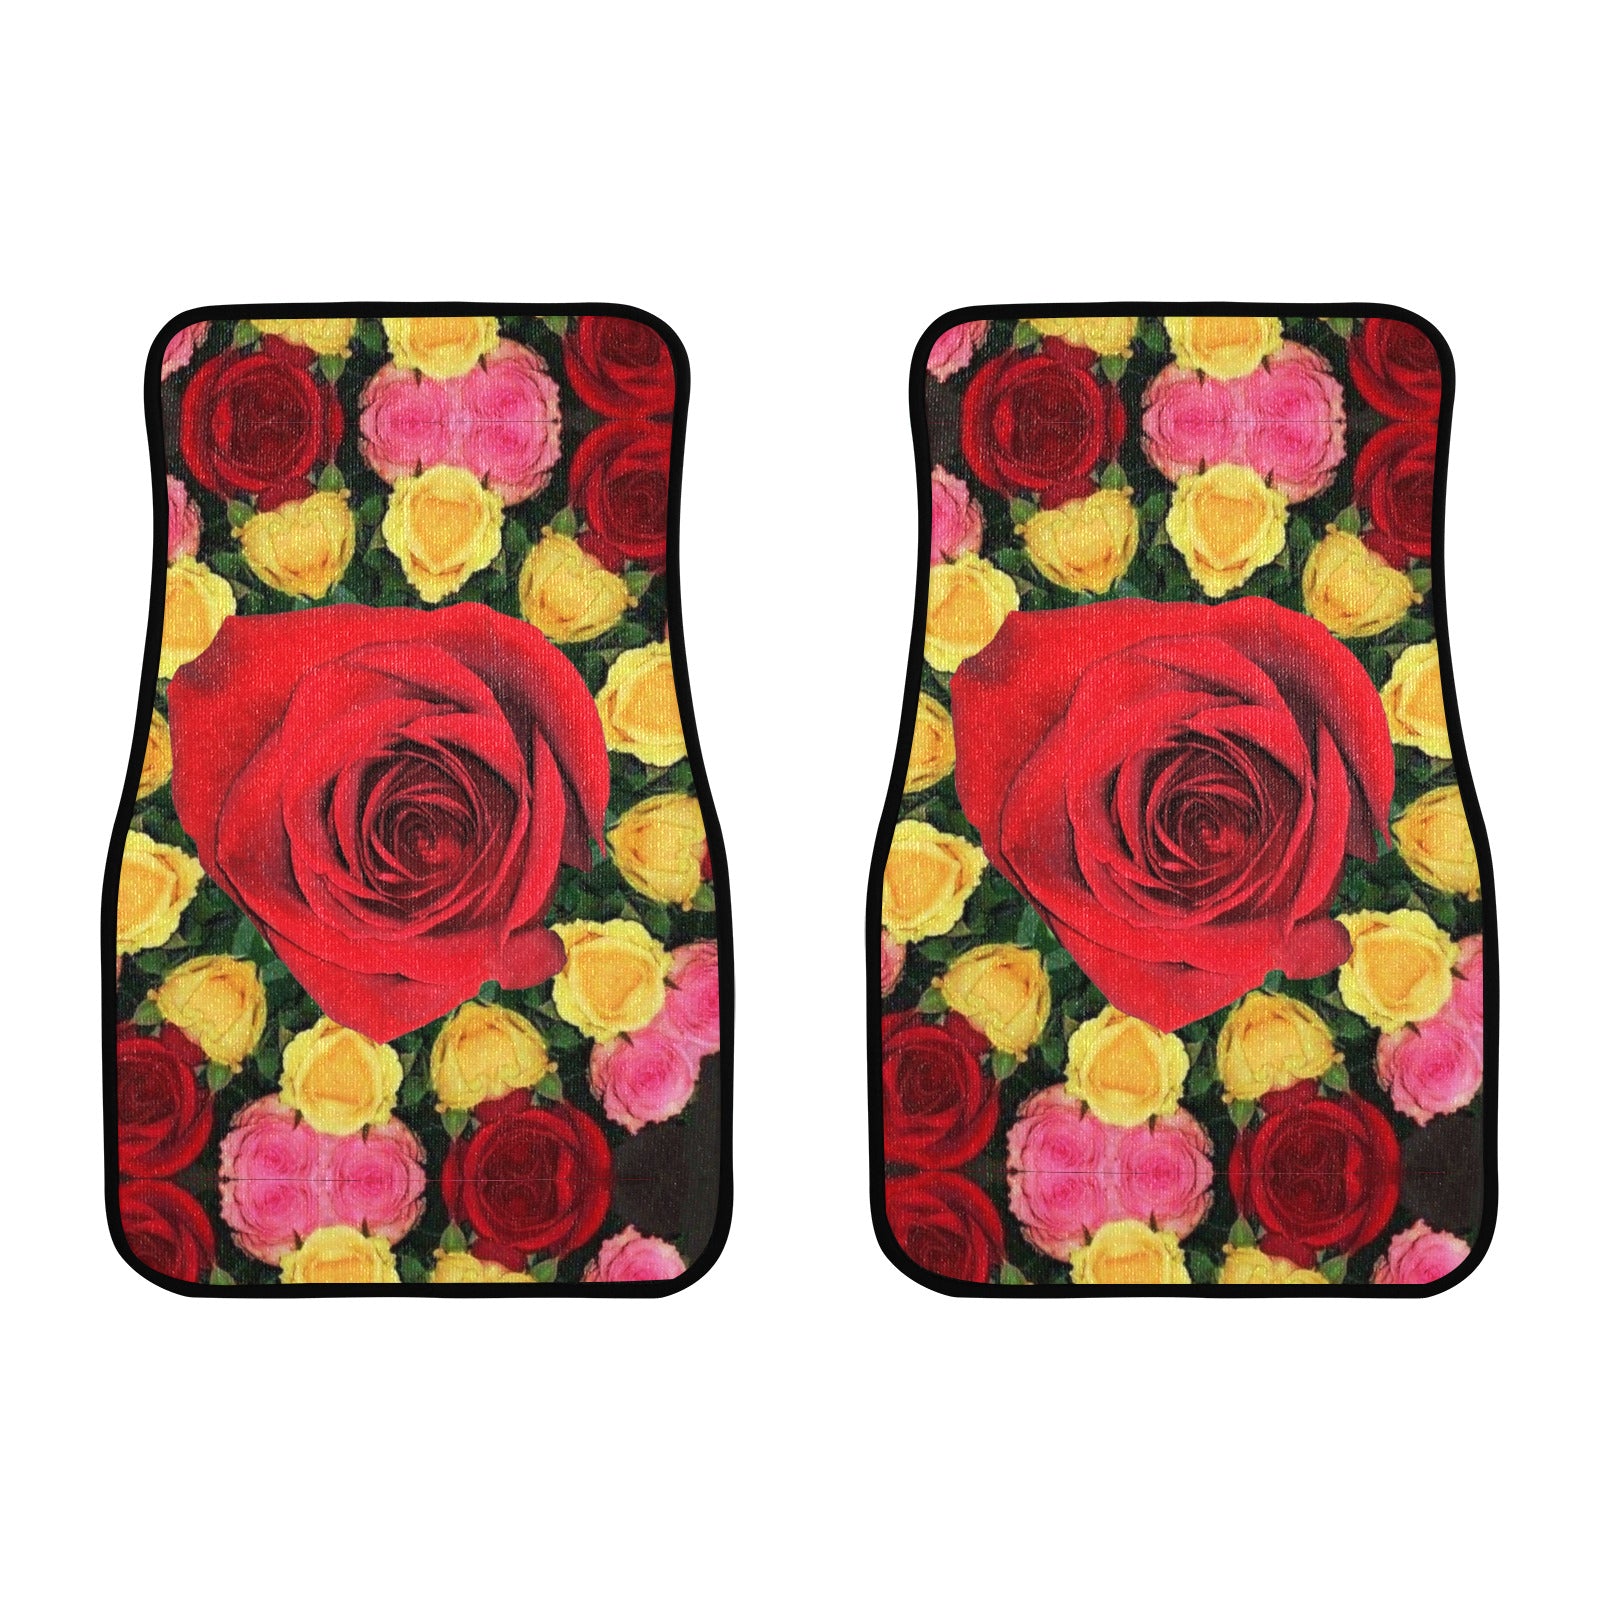 Red and Yellow Roses Front Car Floor Mat (2pcs)